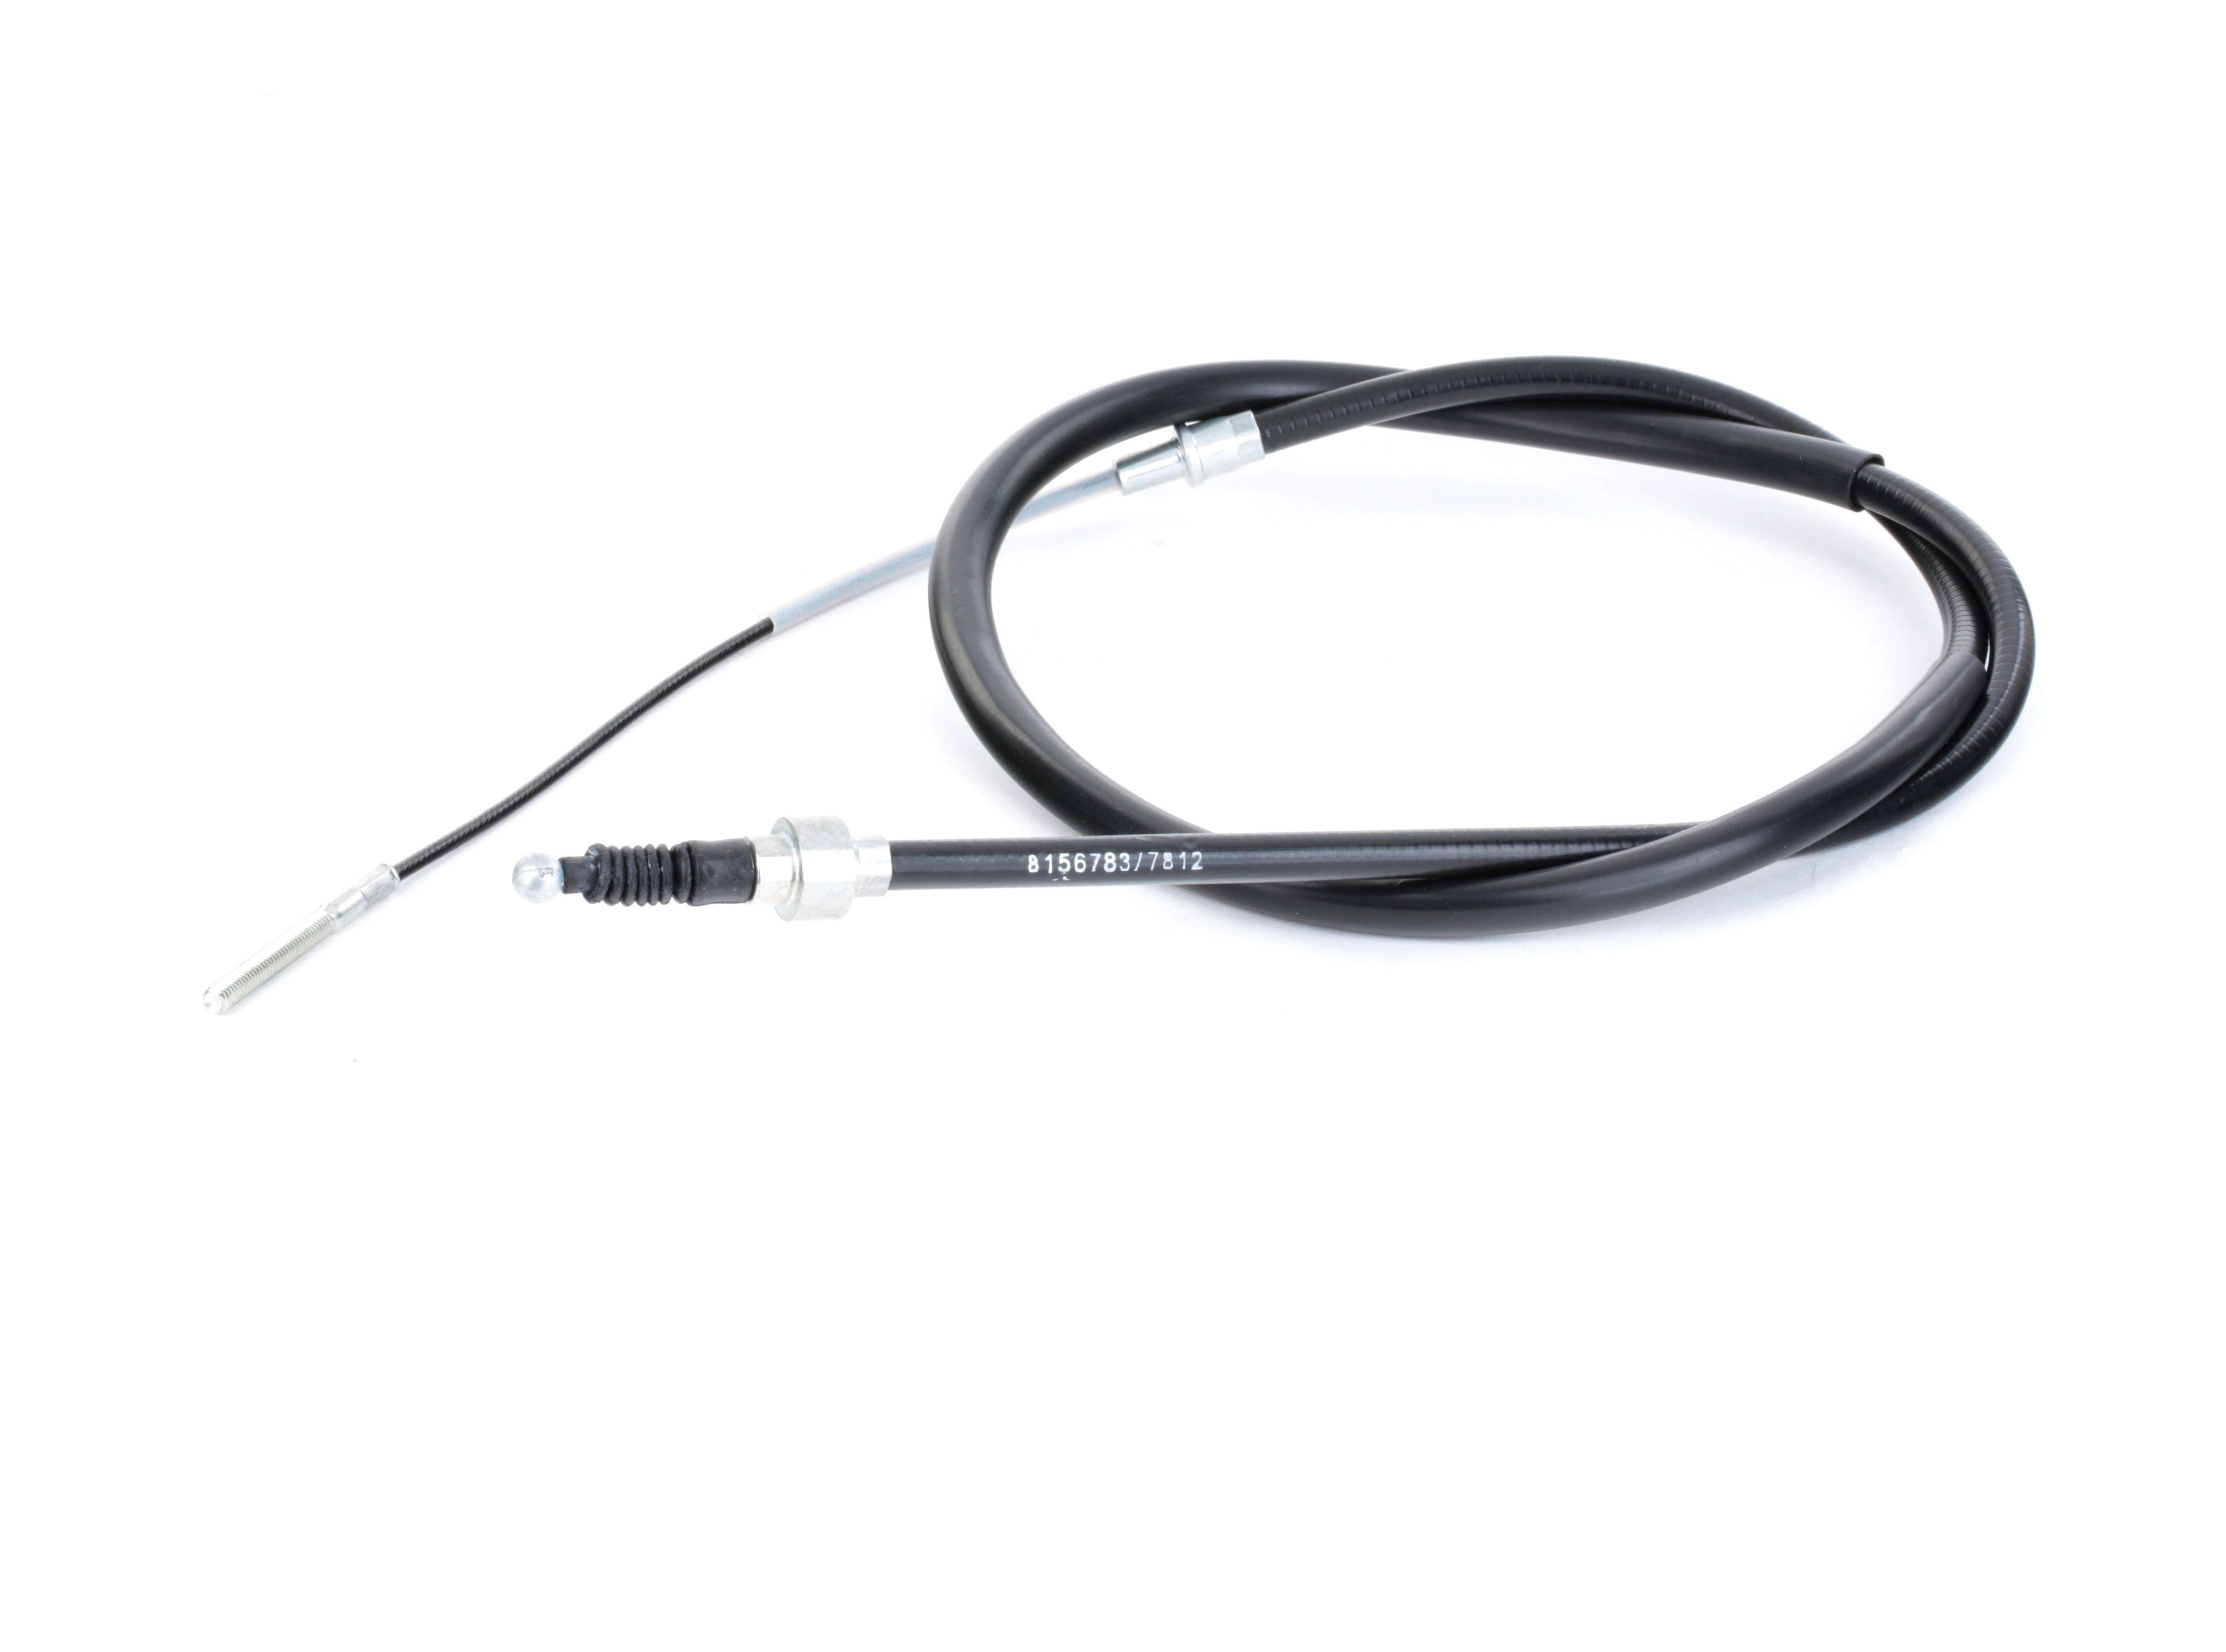 RIDEX 124C0088 Hand brake cable Rear, Right Rear, Left Rear, 1622, 1221, 1622/1221mm, Disc Brake, for parking brake